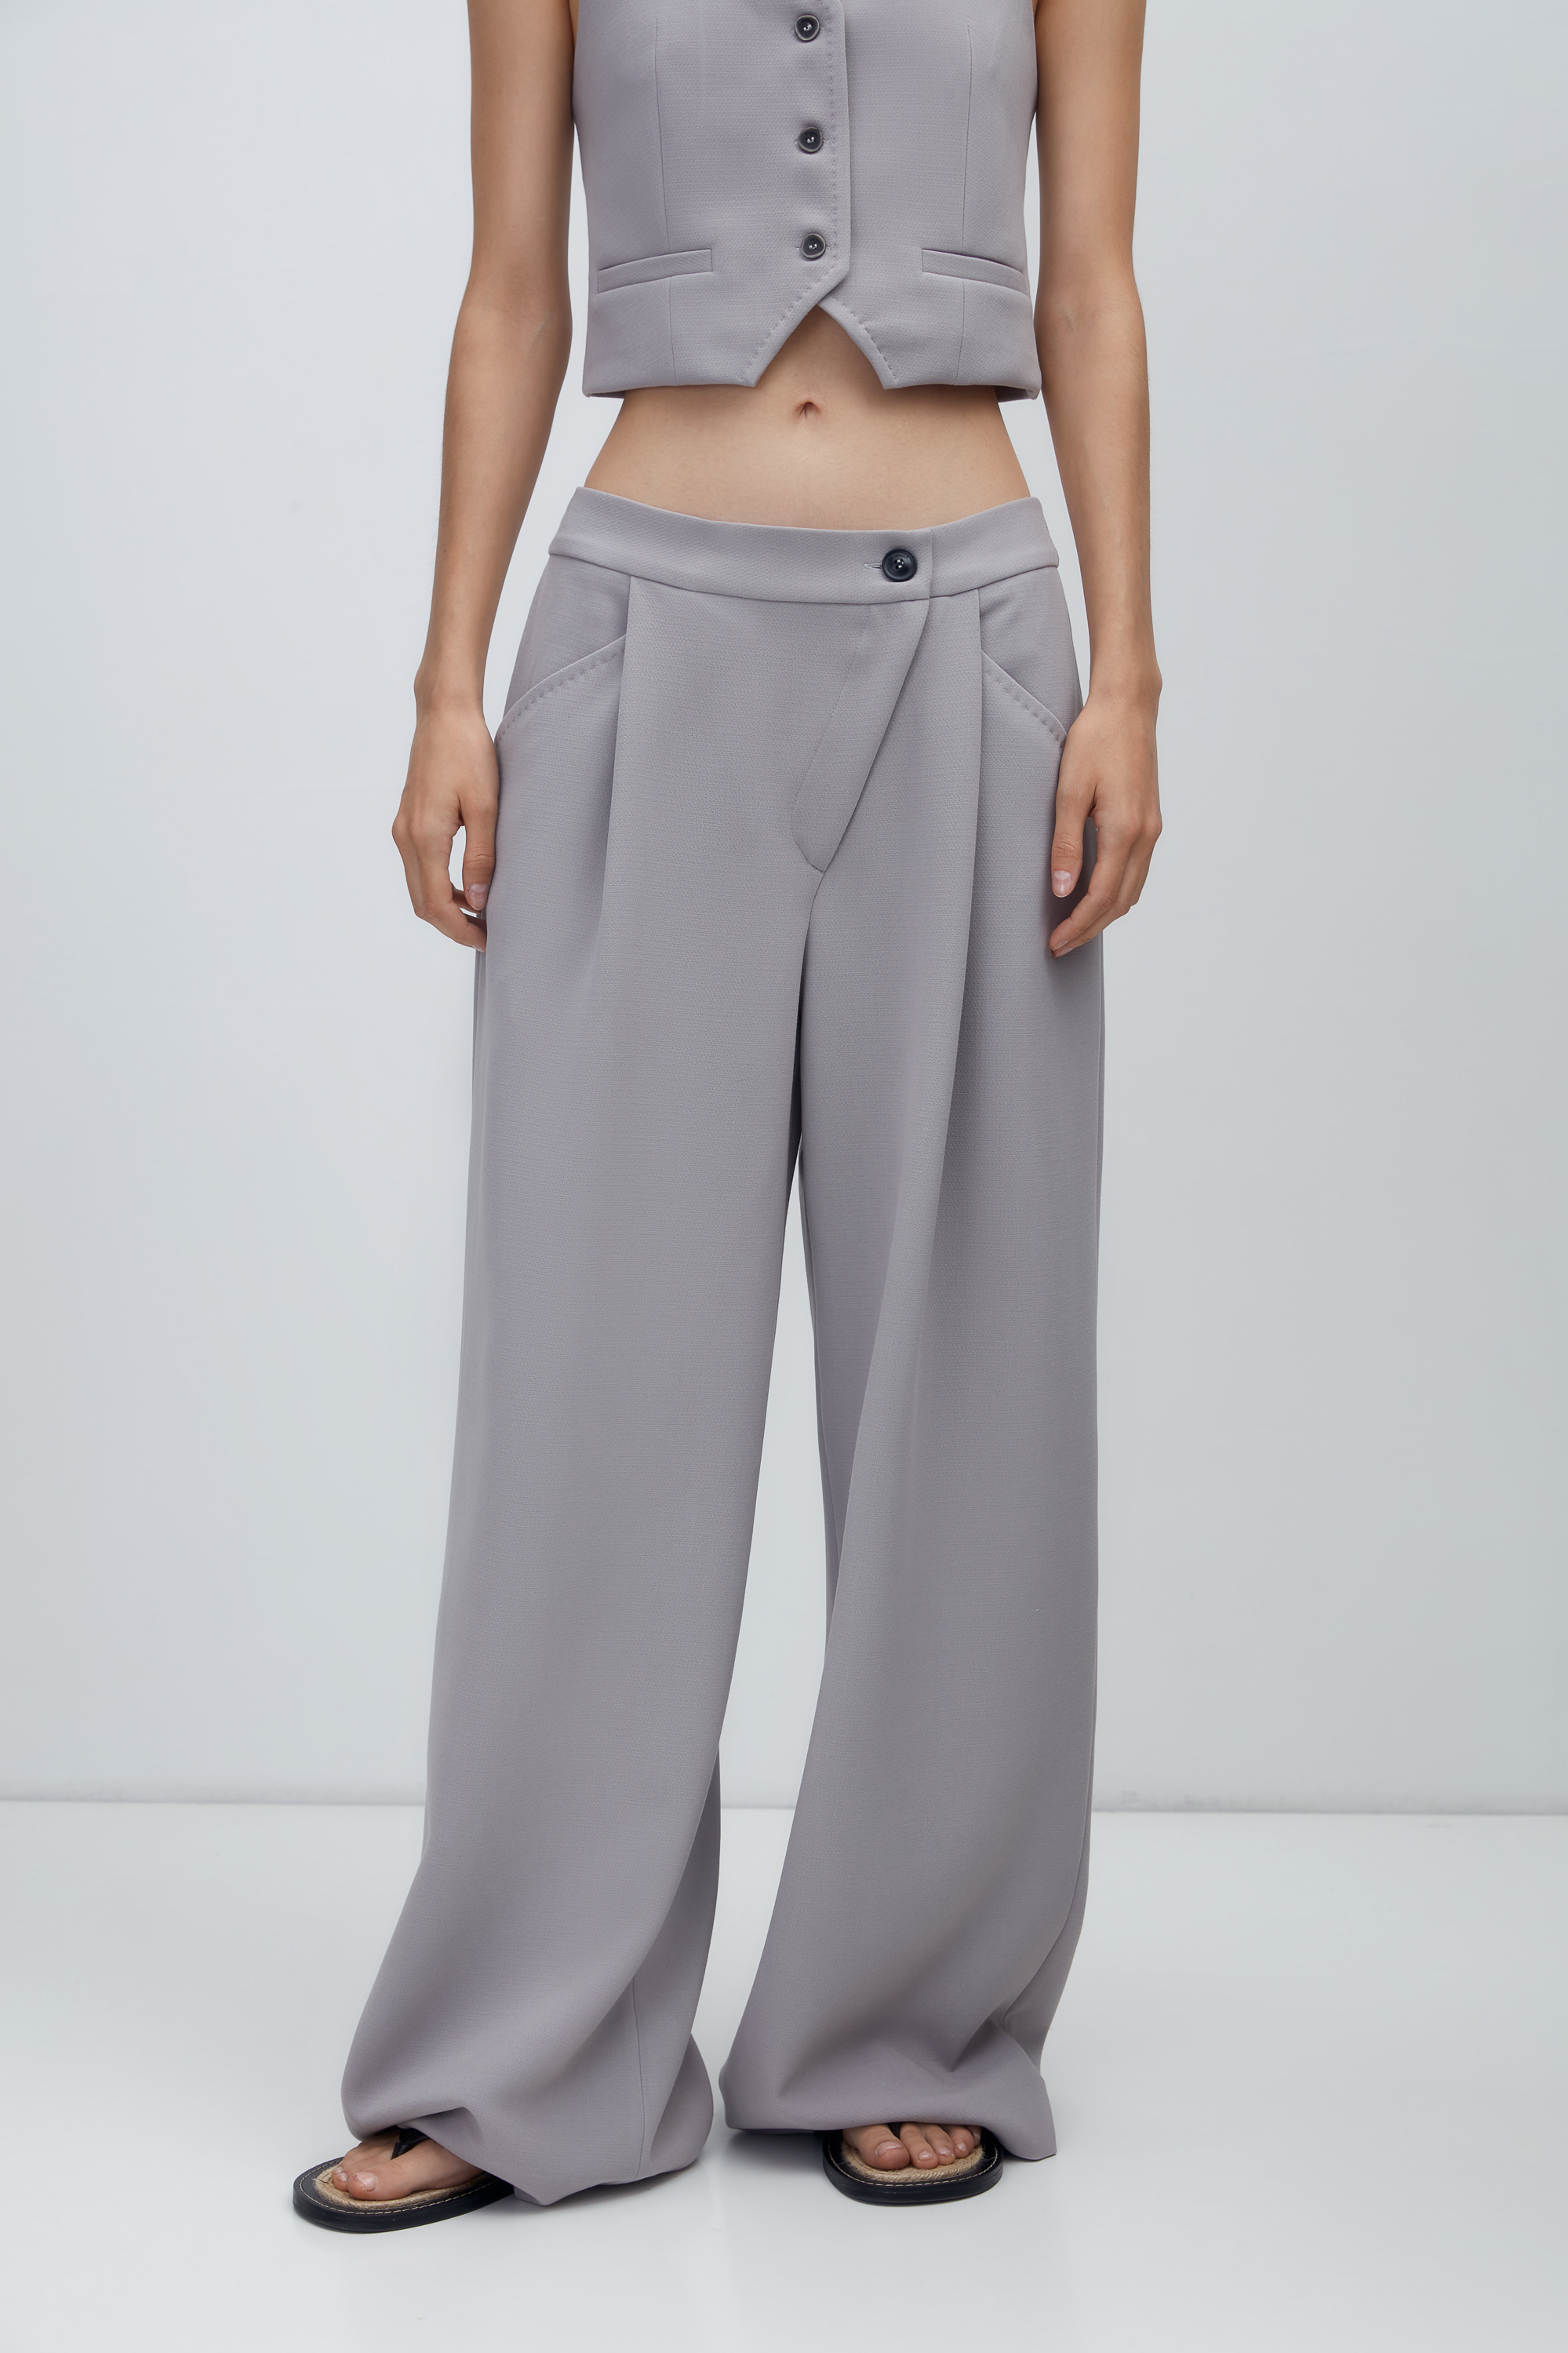 Trousers 4193-04 Grey from BRUSNiKA